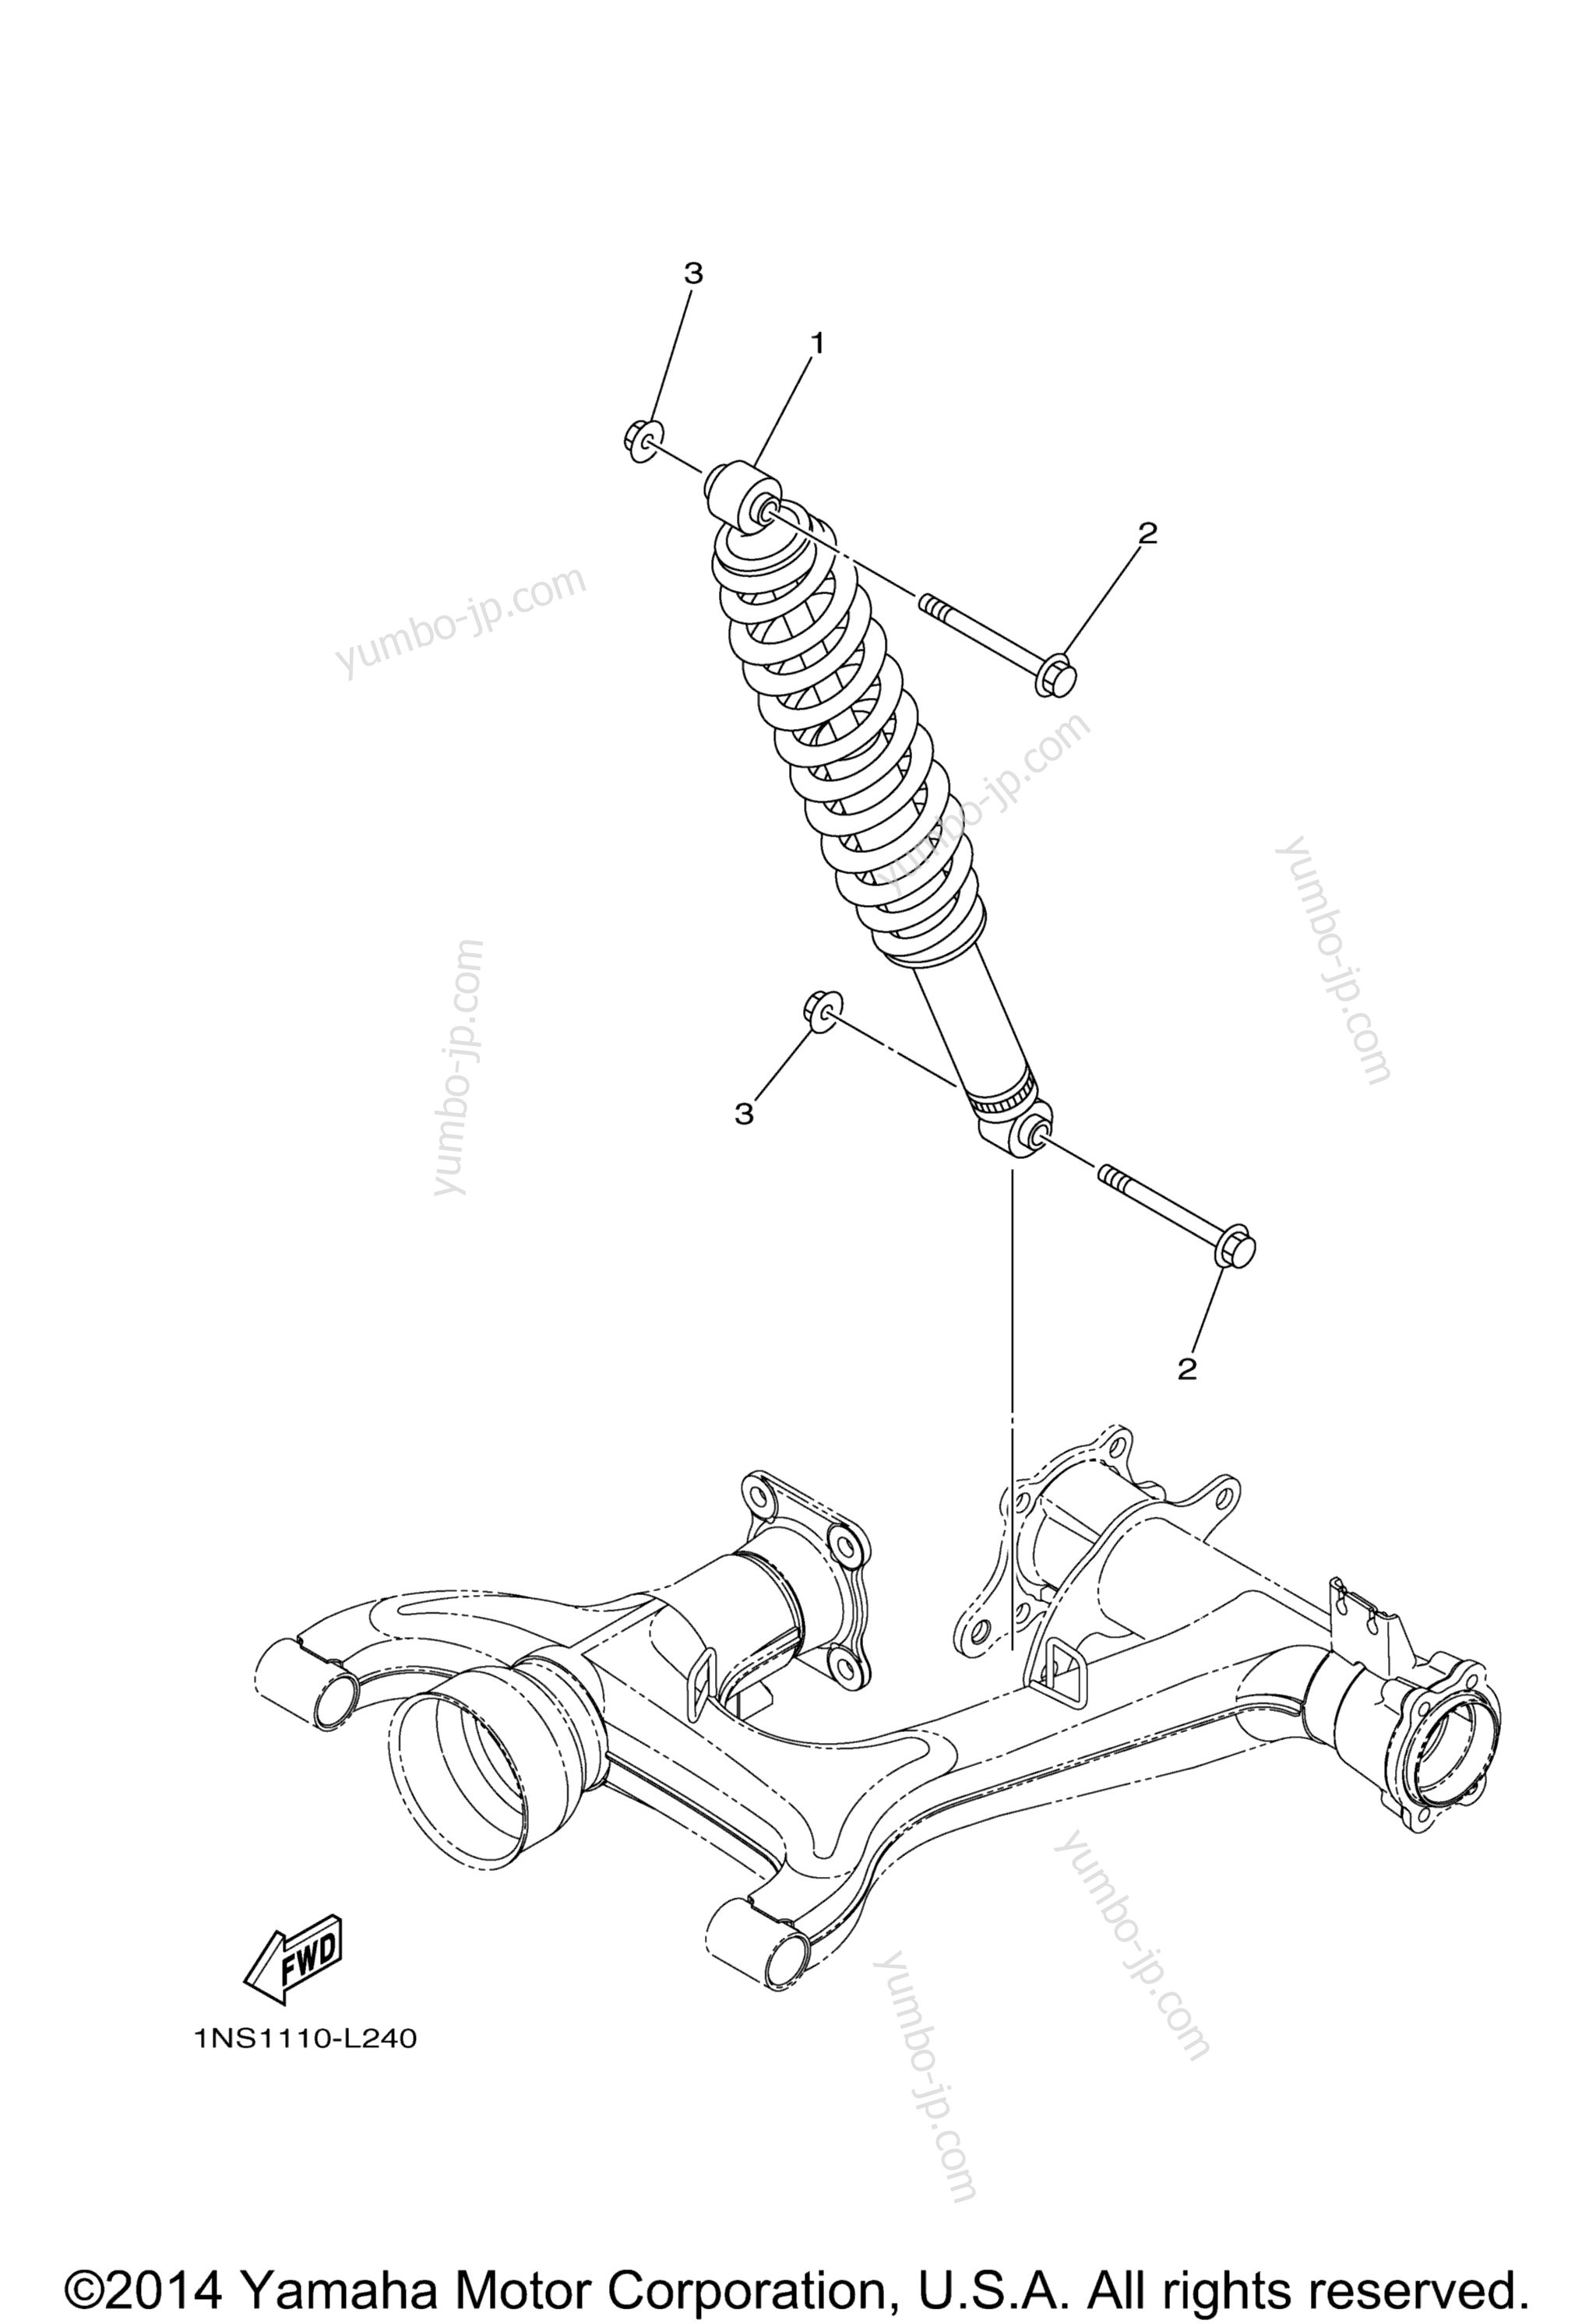 Rear Suspension for ATVs YAMAHA GRIZZLY 350 2WD (YFM350TEL) 2014 year